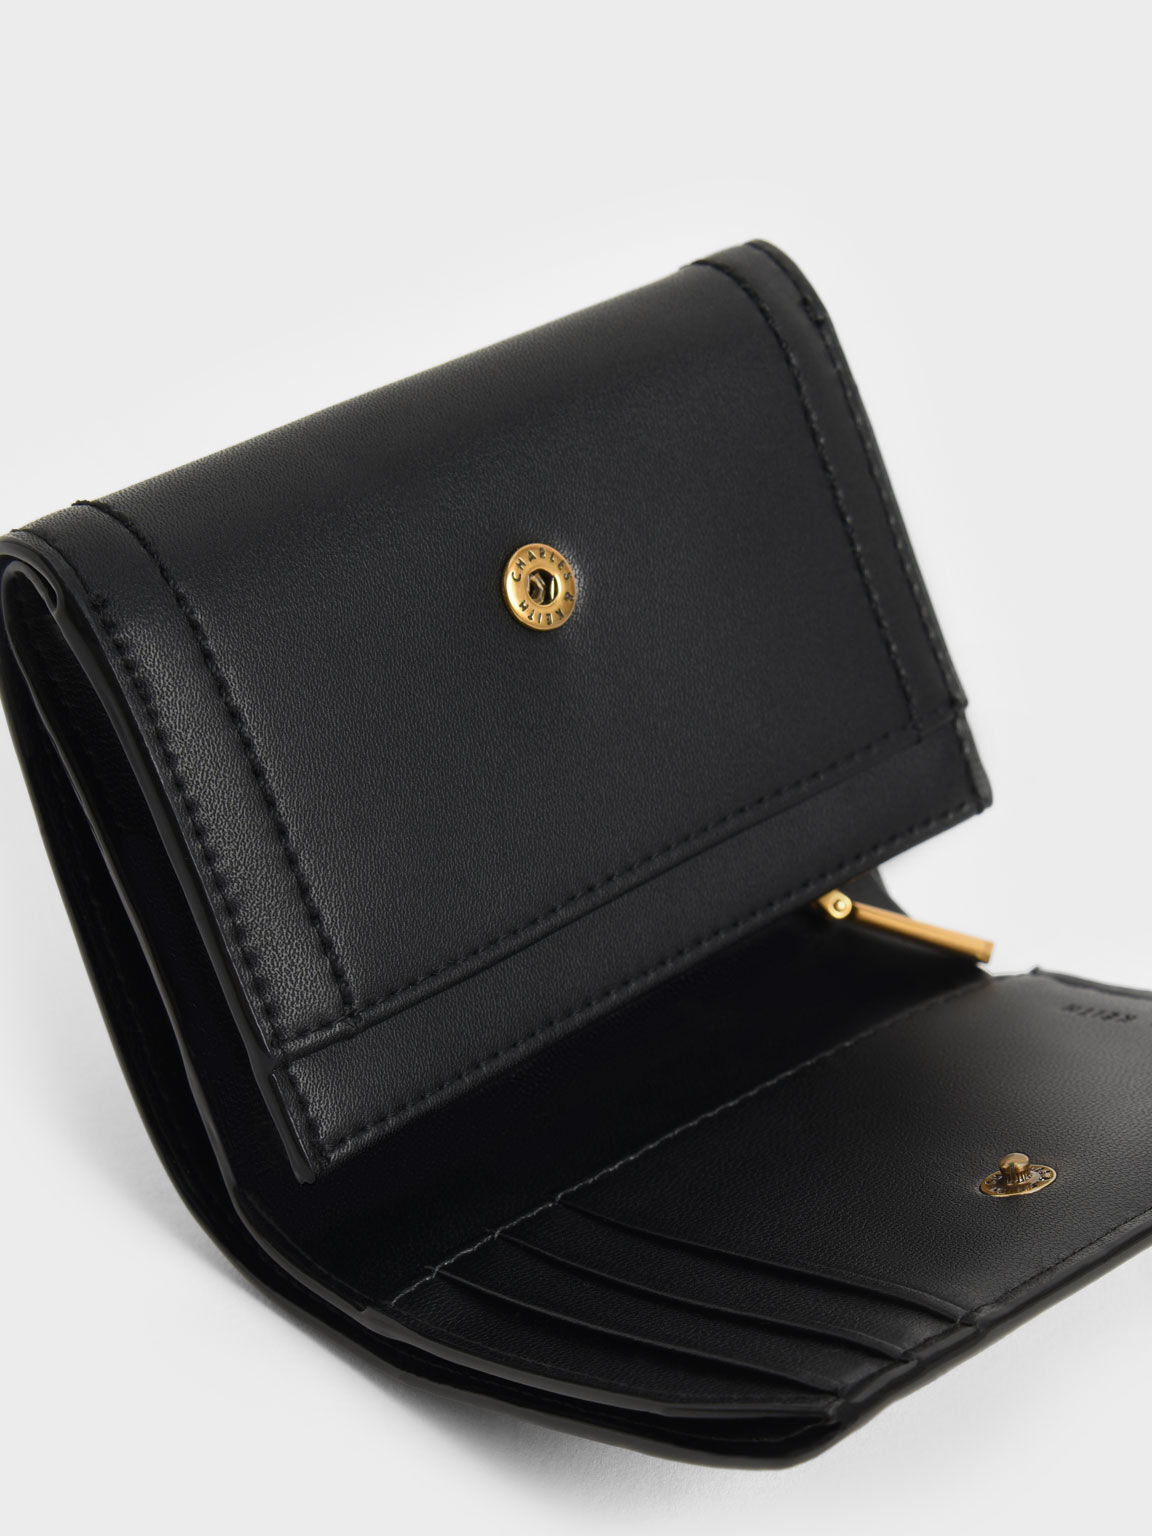 VÍ NỮ CHARLES KEITH SONNET SNAP BUTTON SMALL WALLET 22